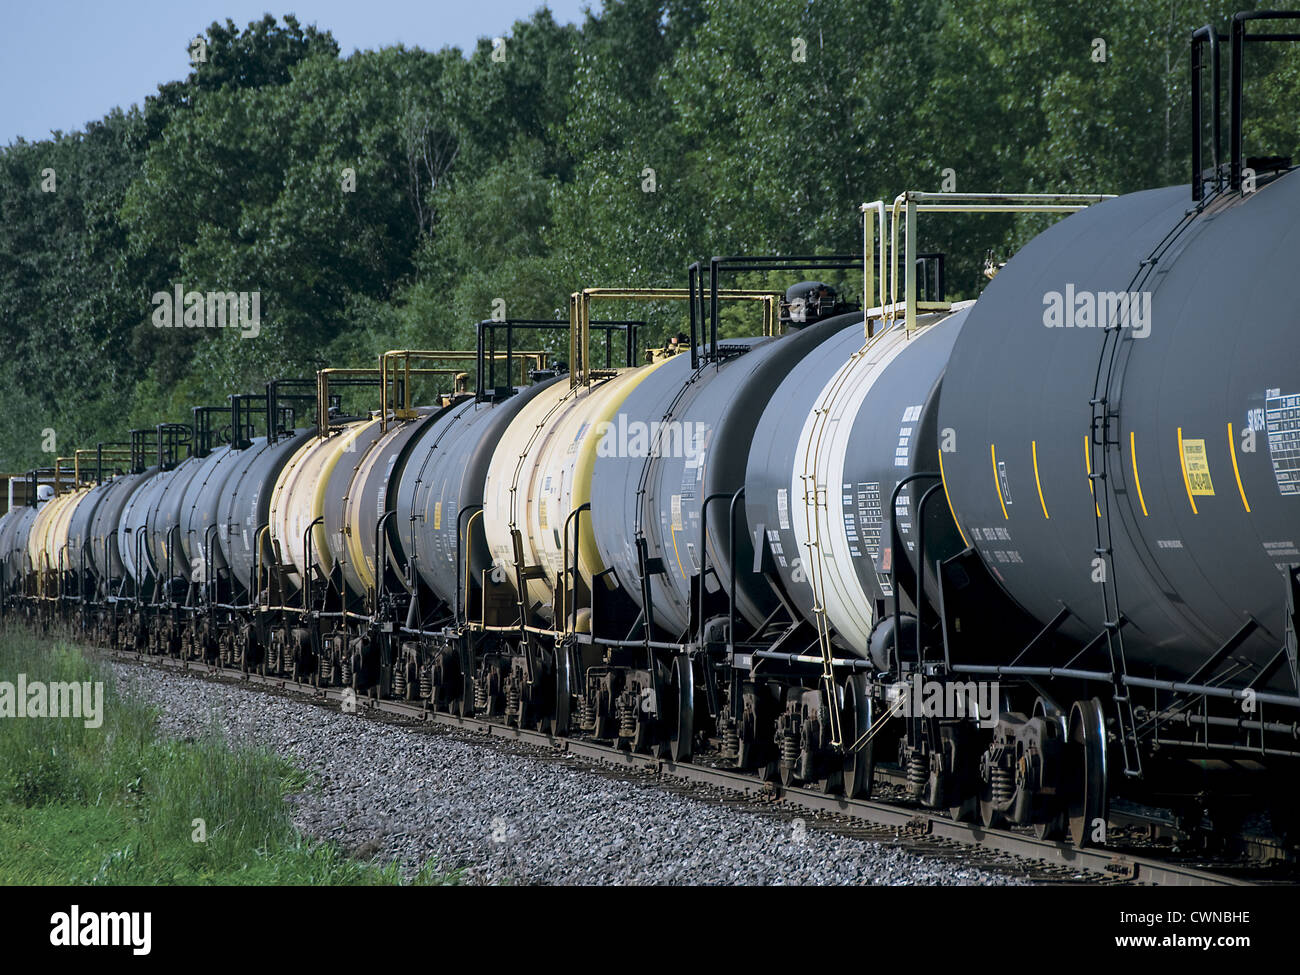 A string of railroad tank cars on a freight train in Indiana Stock Photo